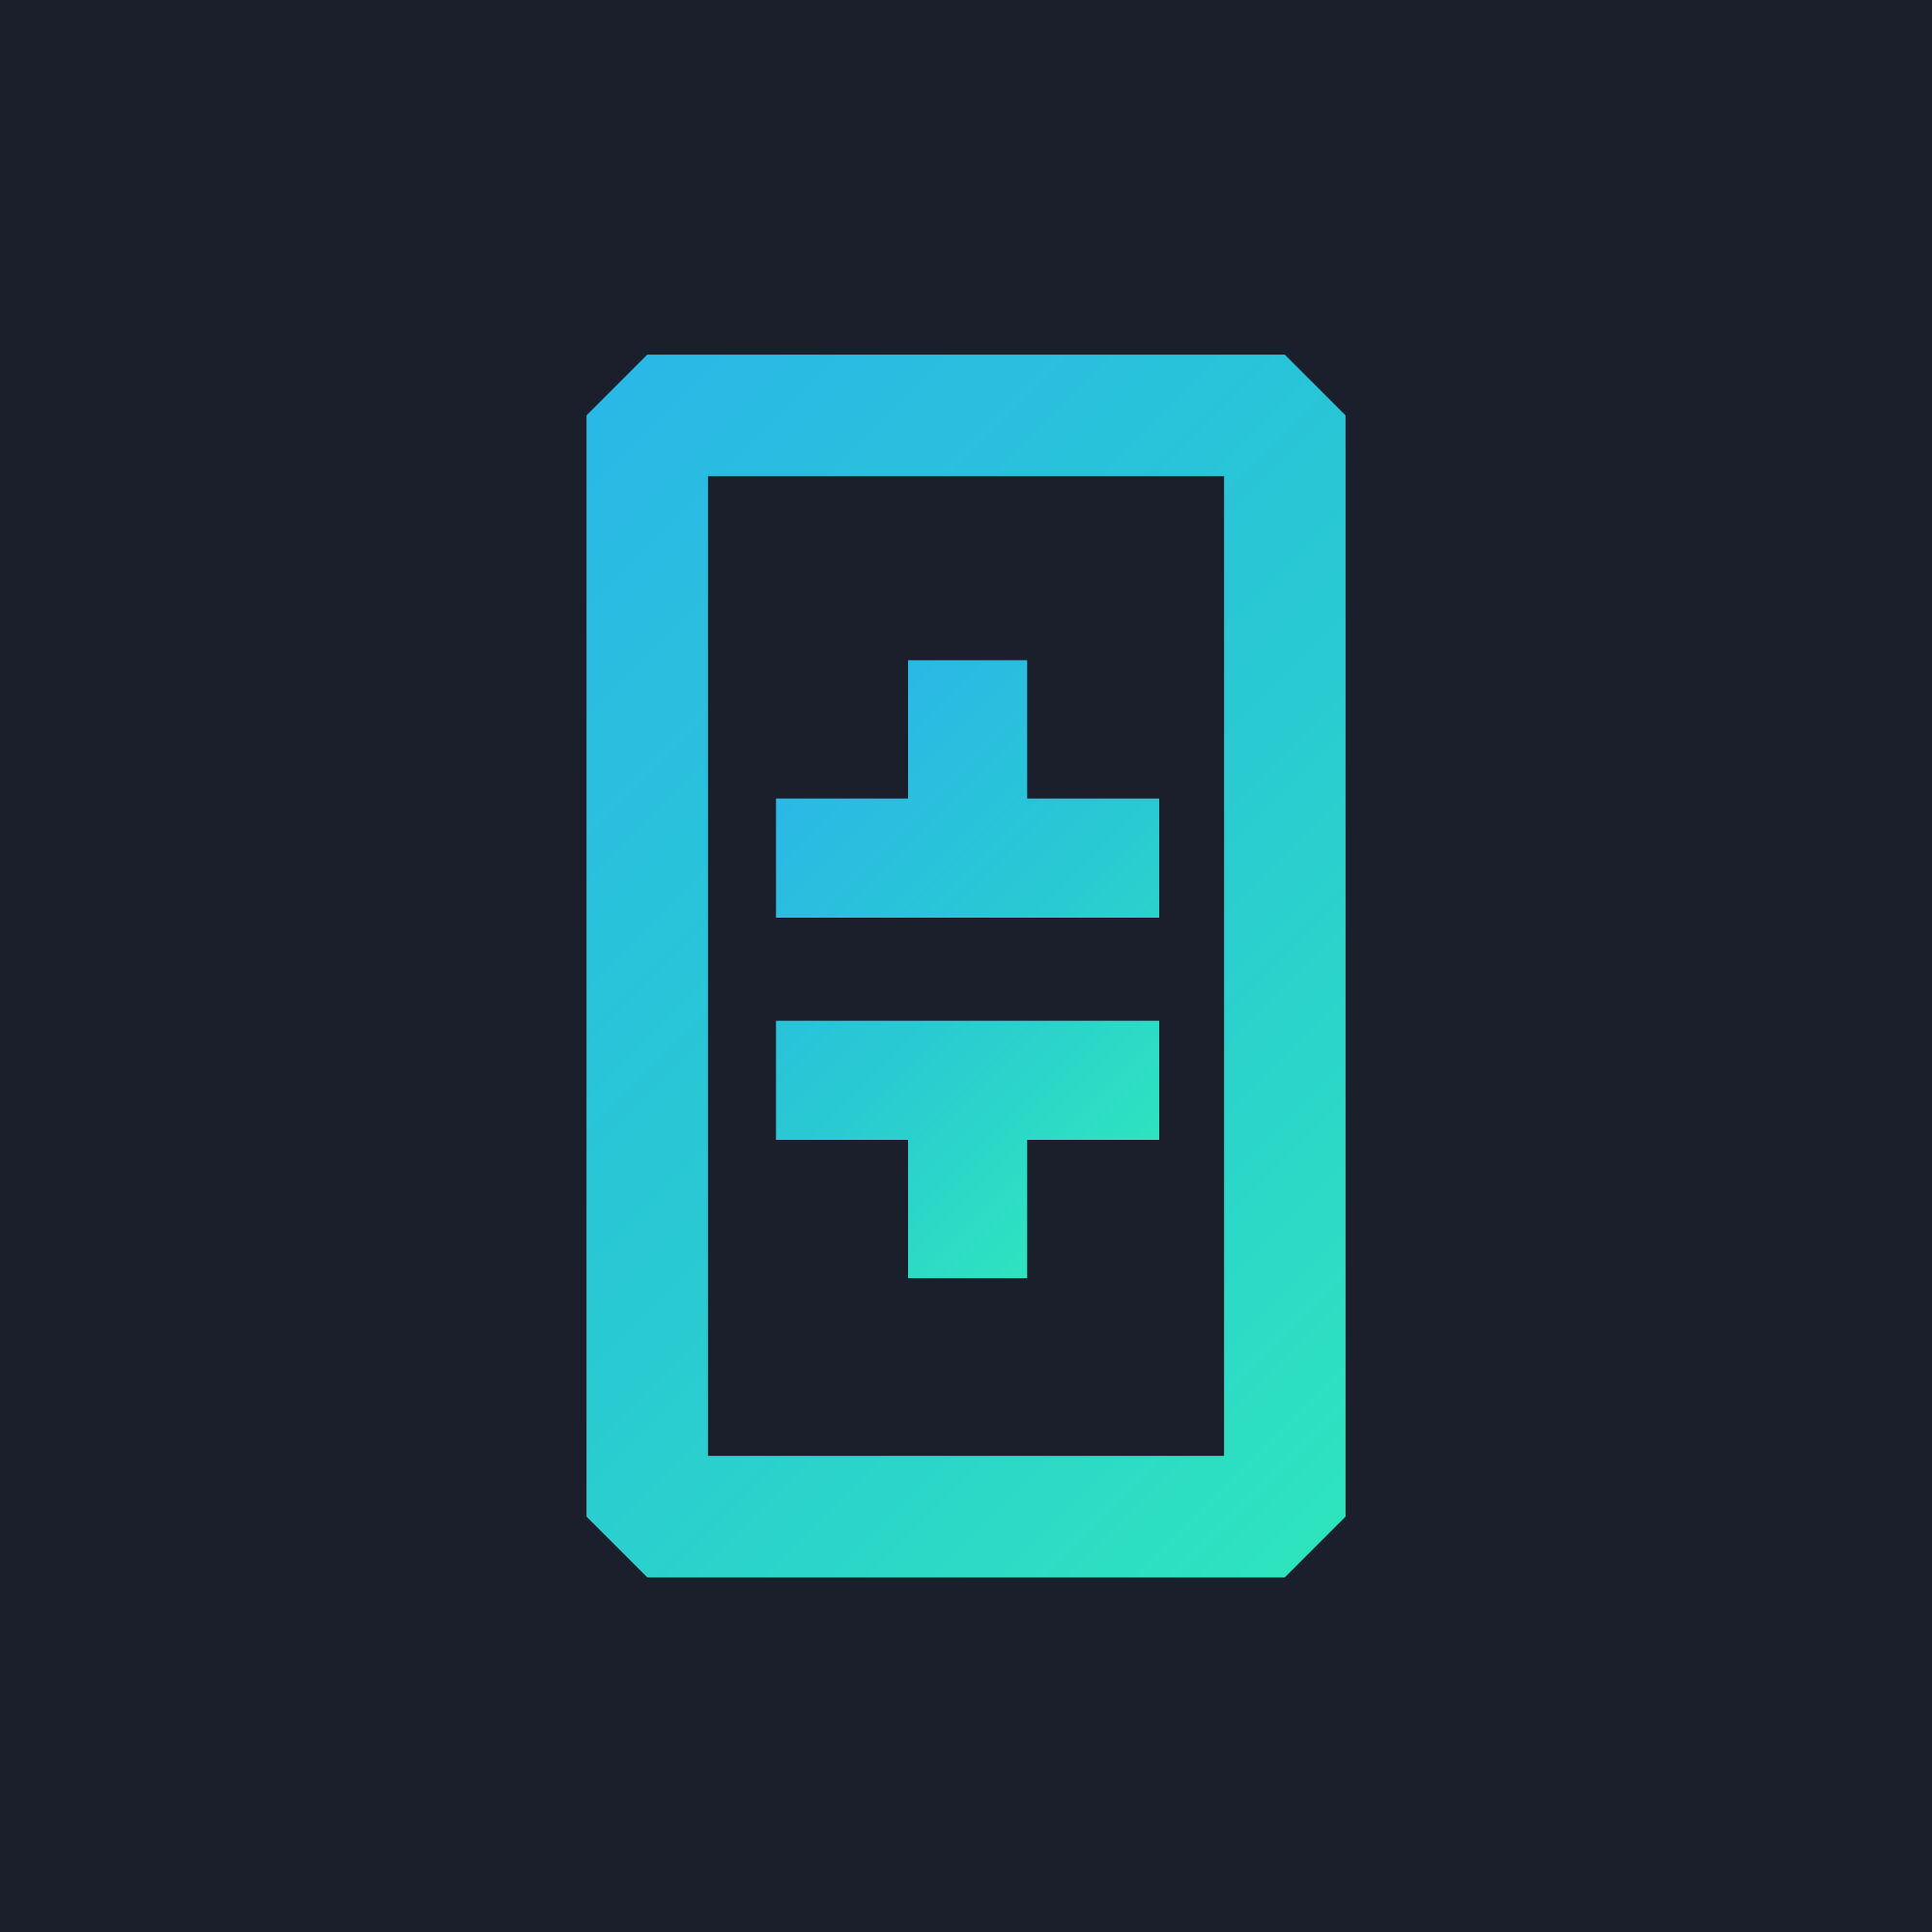 ThetaNetwork logo dark box with teal battery shape